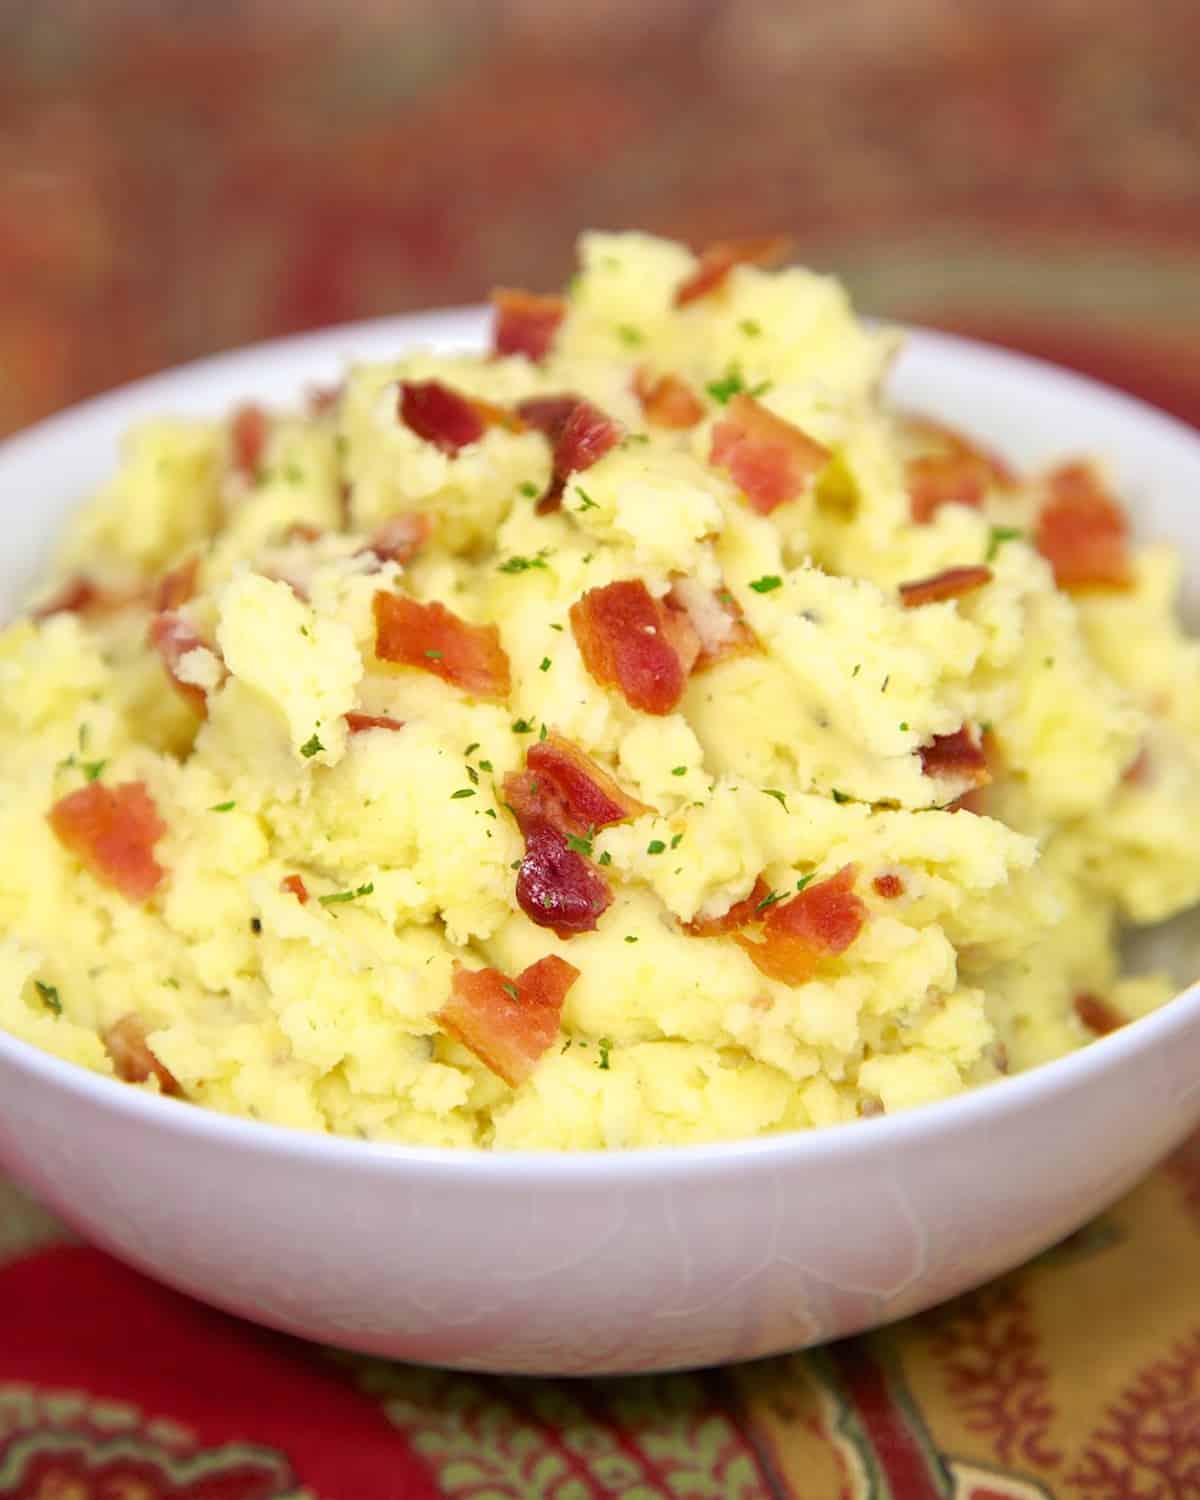 Ranch Mashed Potatoes - yukon gold potatoes, butter, Ranch dressing and bacon. Super quick side dish that packs tons of flavor!